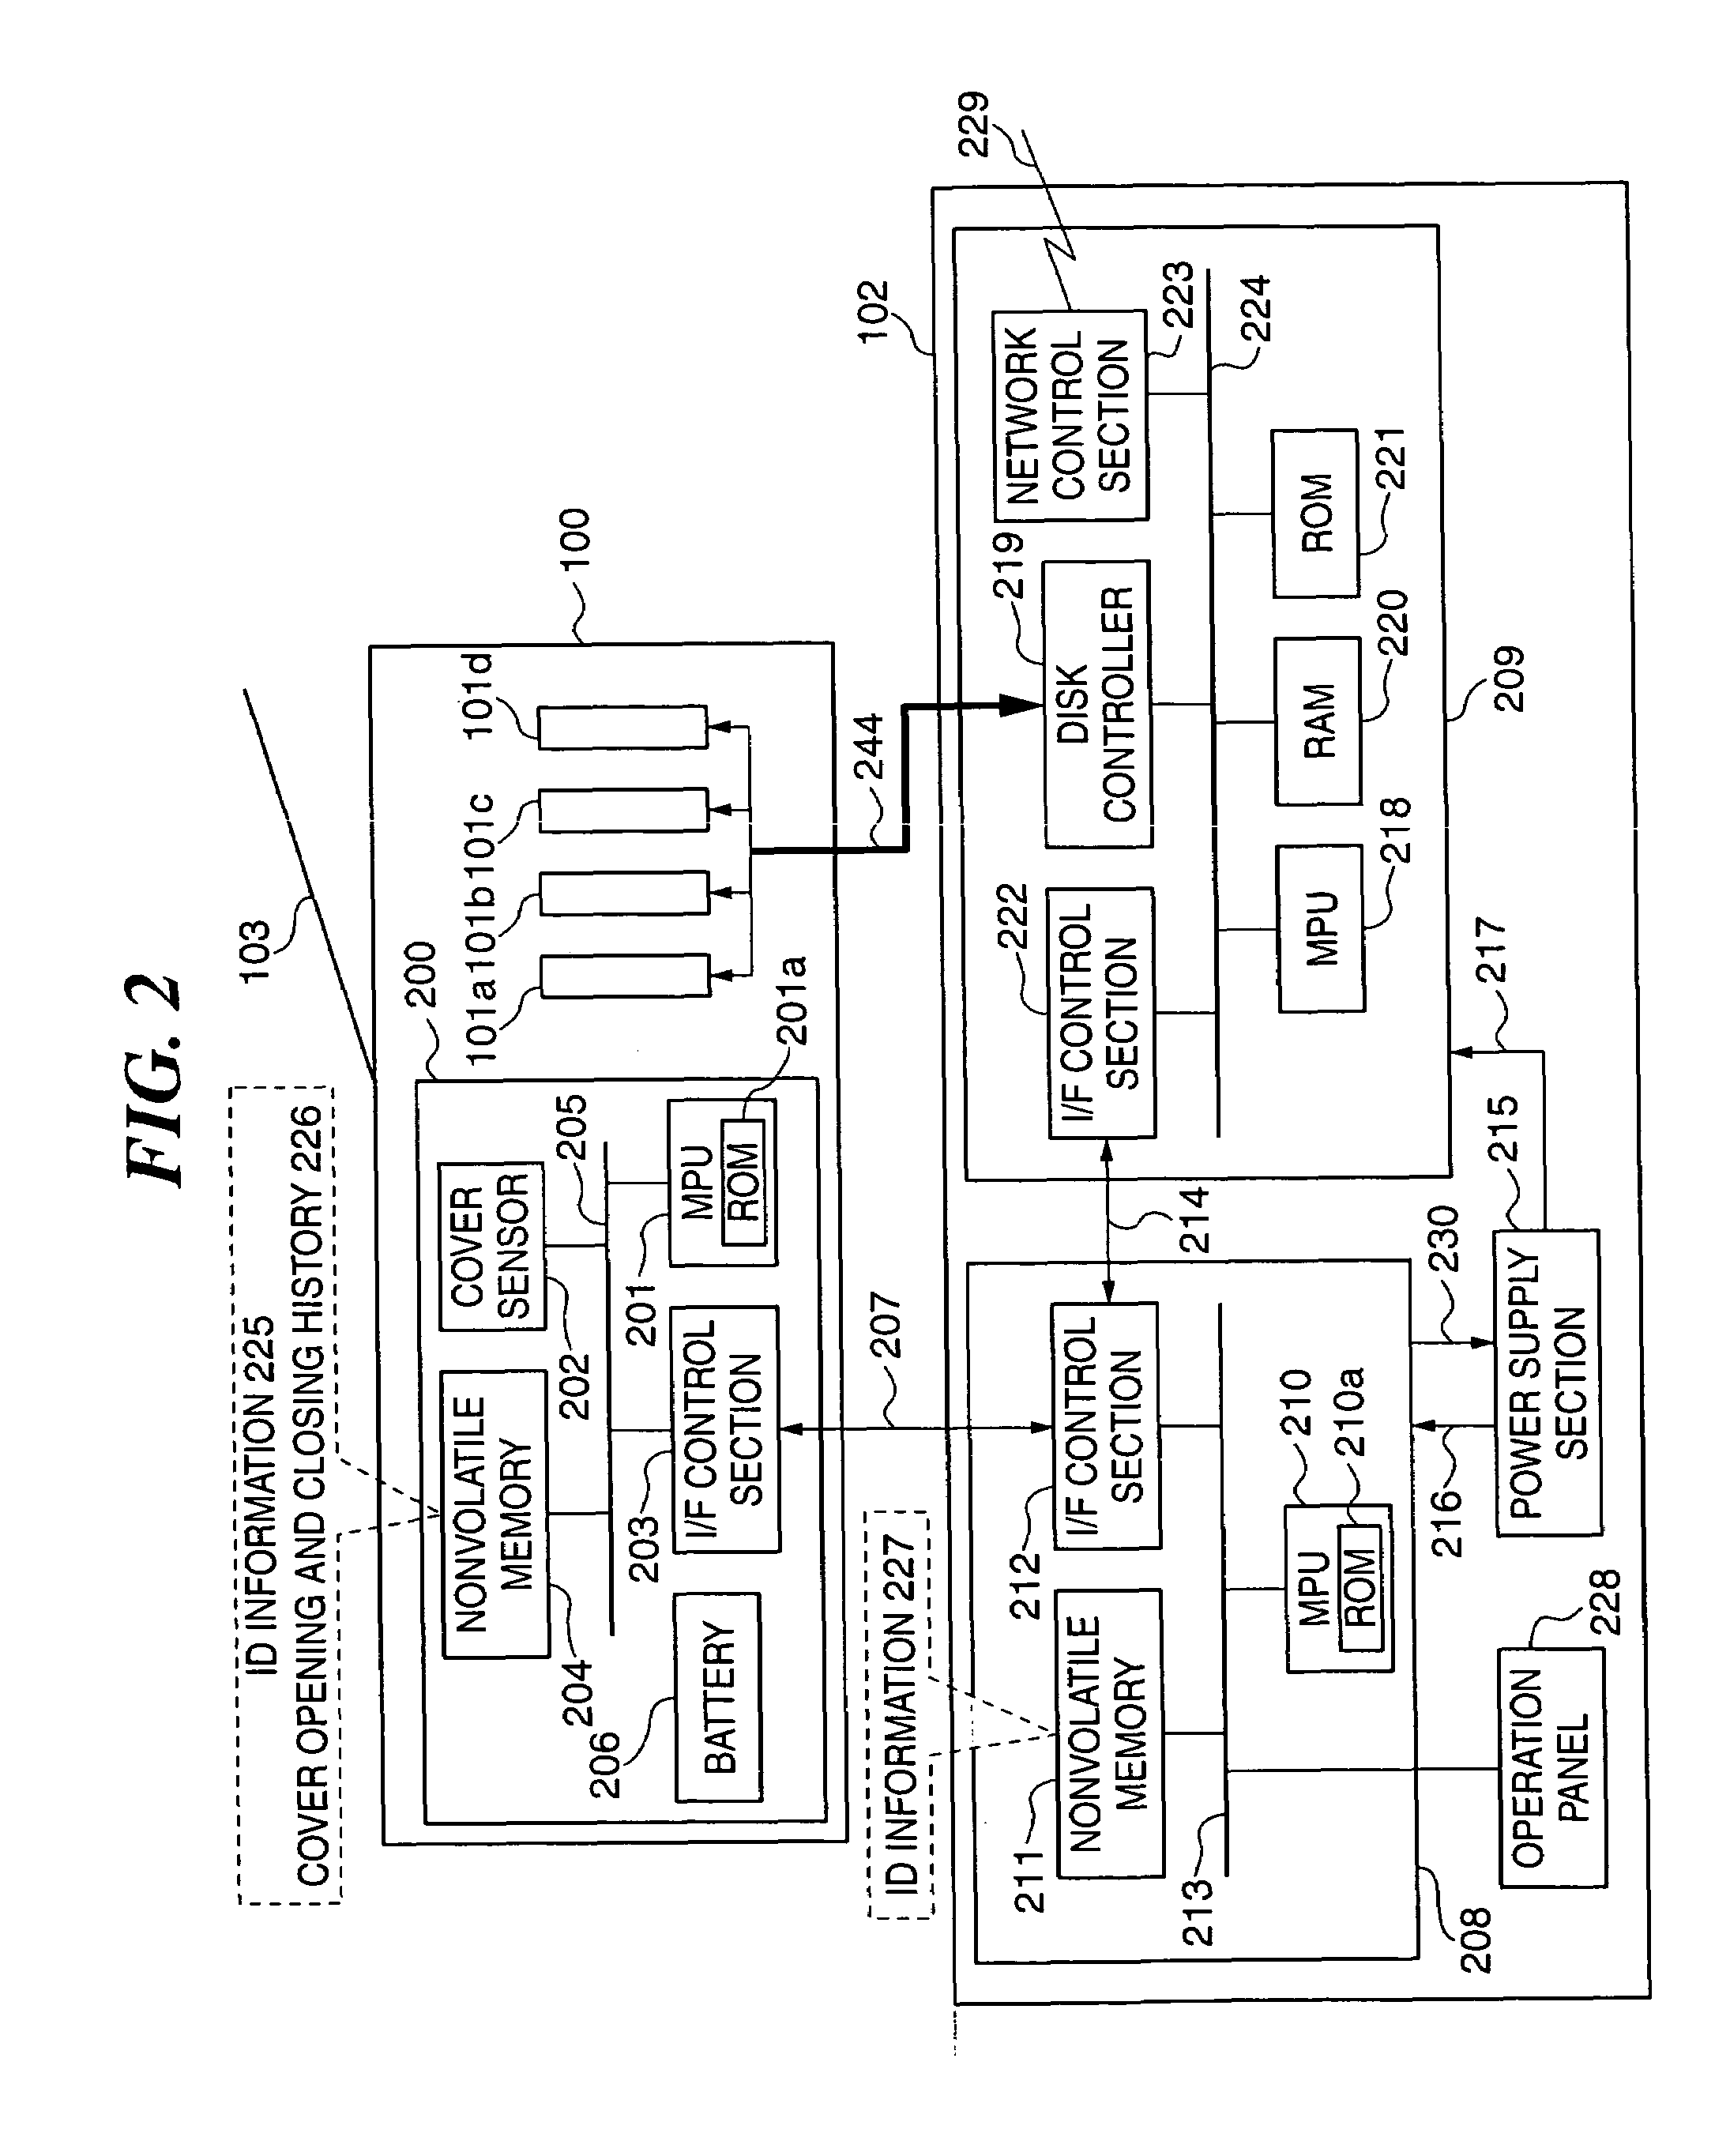 Information processing system, information processing apparatus, method of controlling the information processing apparatus, disk array device, method of controlling the disk array device, method of controlling display of the disk array device, and control programs for implementing the methods